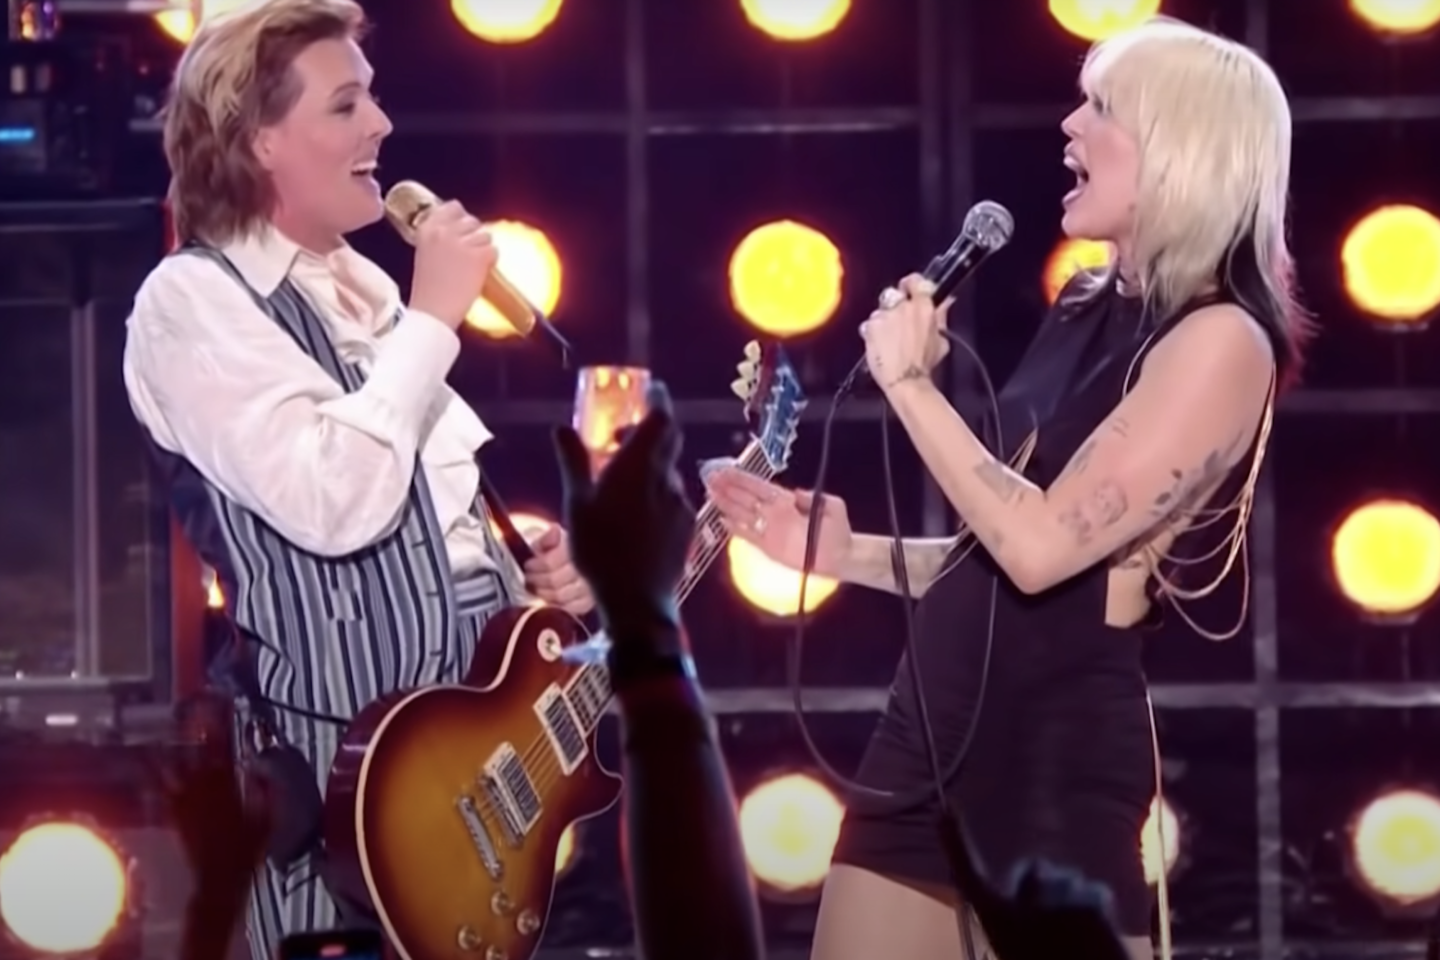 Miley Cyrus and Brandi Carlile perform together on New Year's Eve